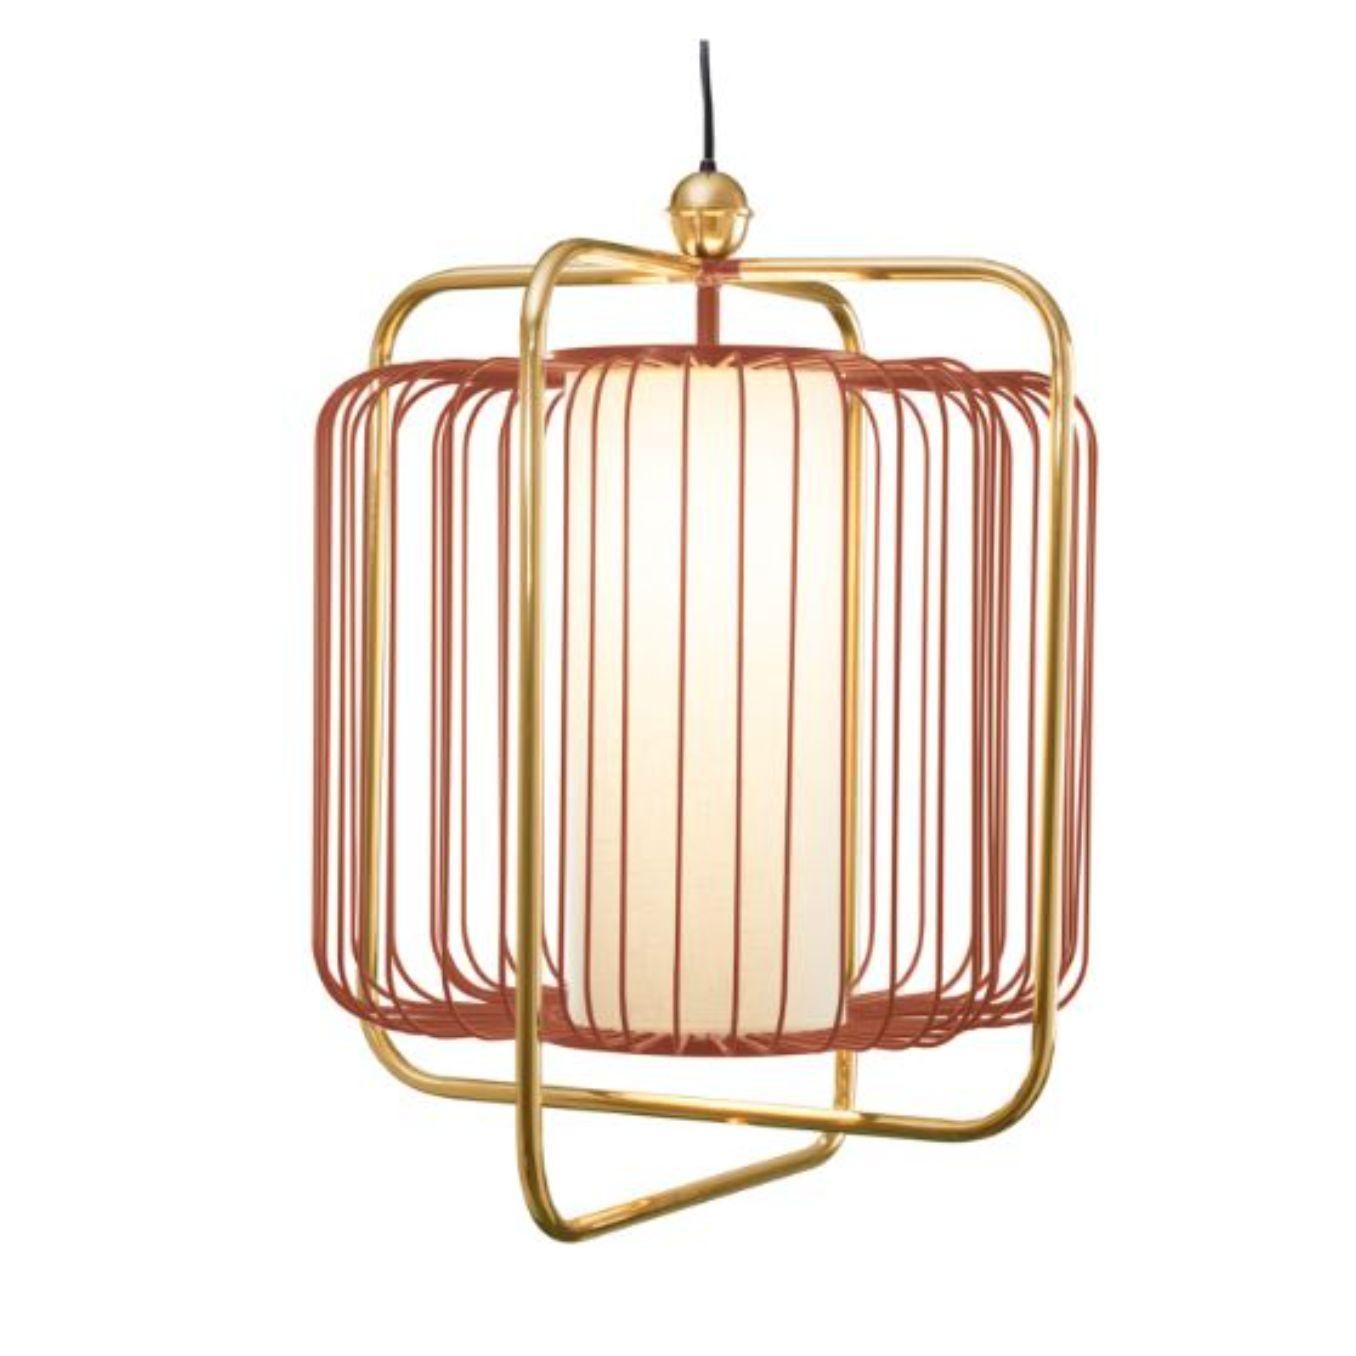 Brass and Salmon Jules Suspension lamp by Dooq
Dimensions: W 73 x D 73 x H 72 cm
Materials: lacquered metal, polished or brushed metal, brass.
abat-jour: cotton
Also available in different colors and materials.